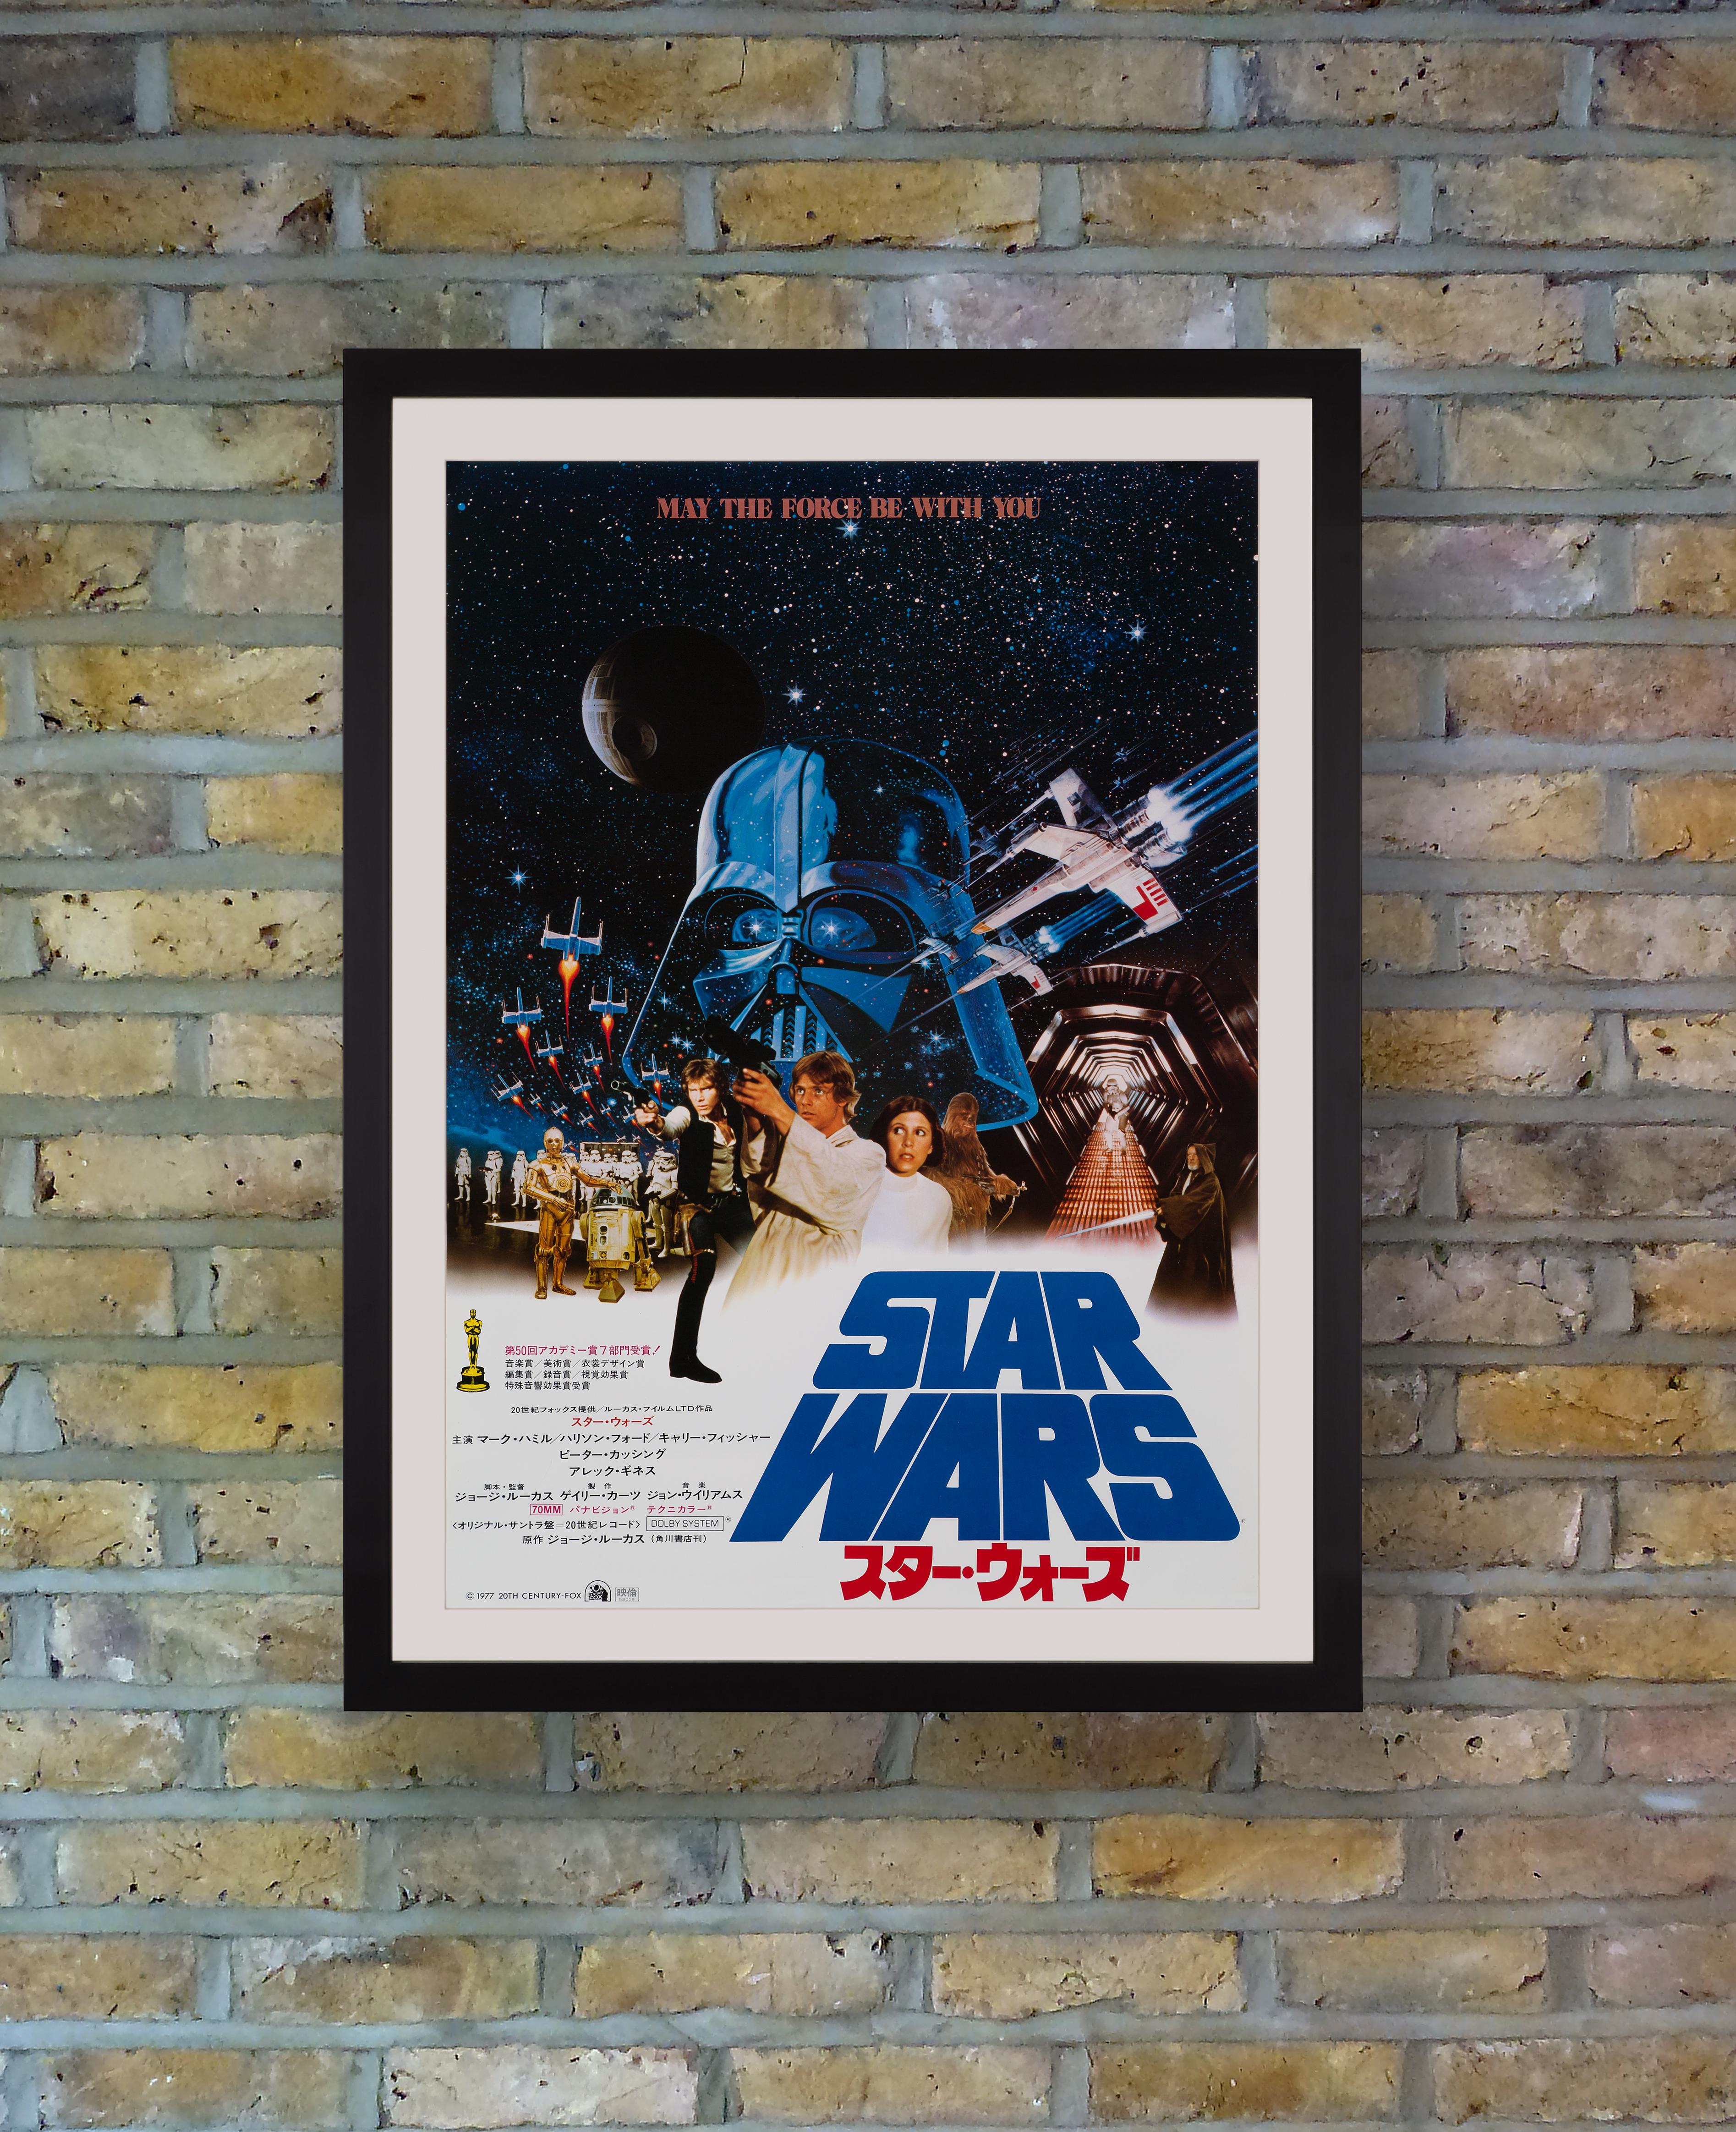 Featuring a montage of Tom Jung's and the Hildebrandt brothers' designs for the US poster campaign, this poster was issued for the first release of 'Star Wars' in Japan in 1978. This is the second printing of the first release, with the Oscars